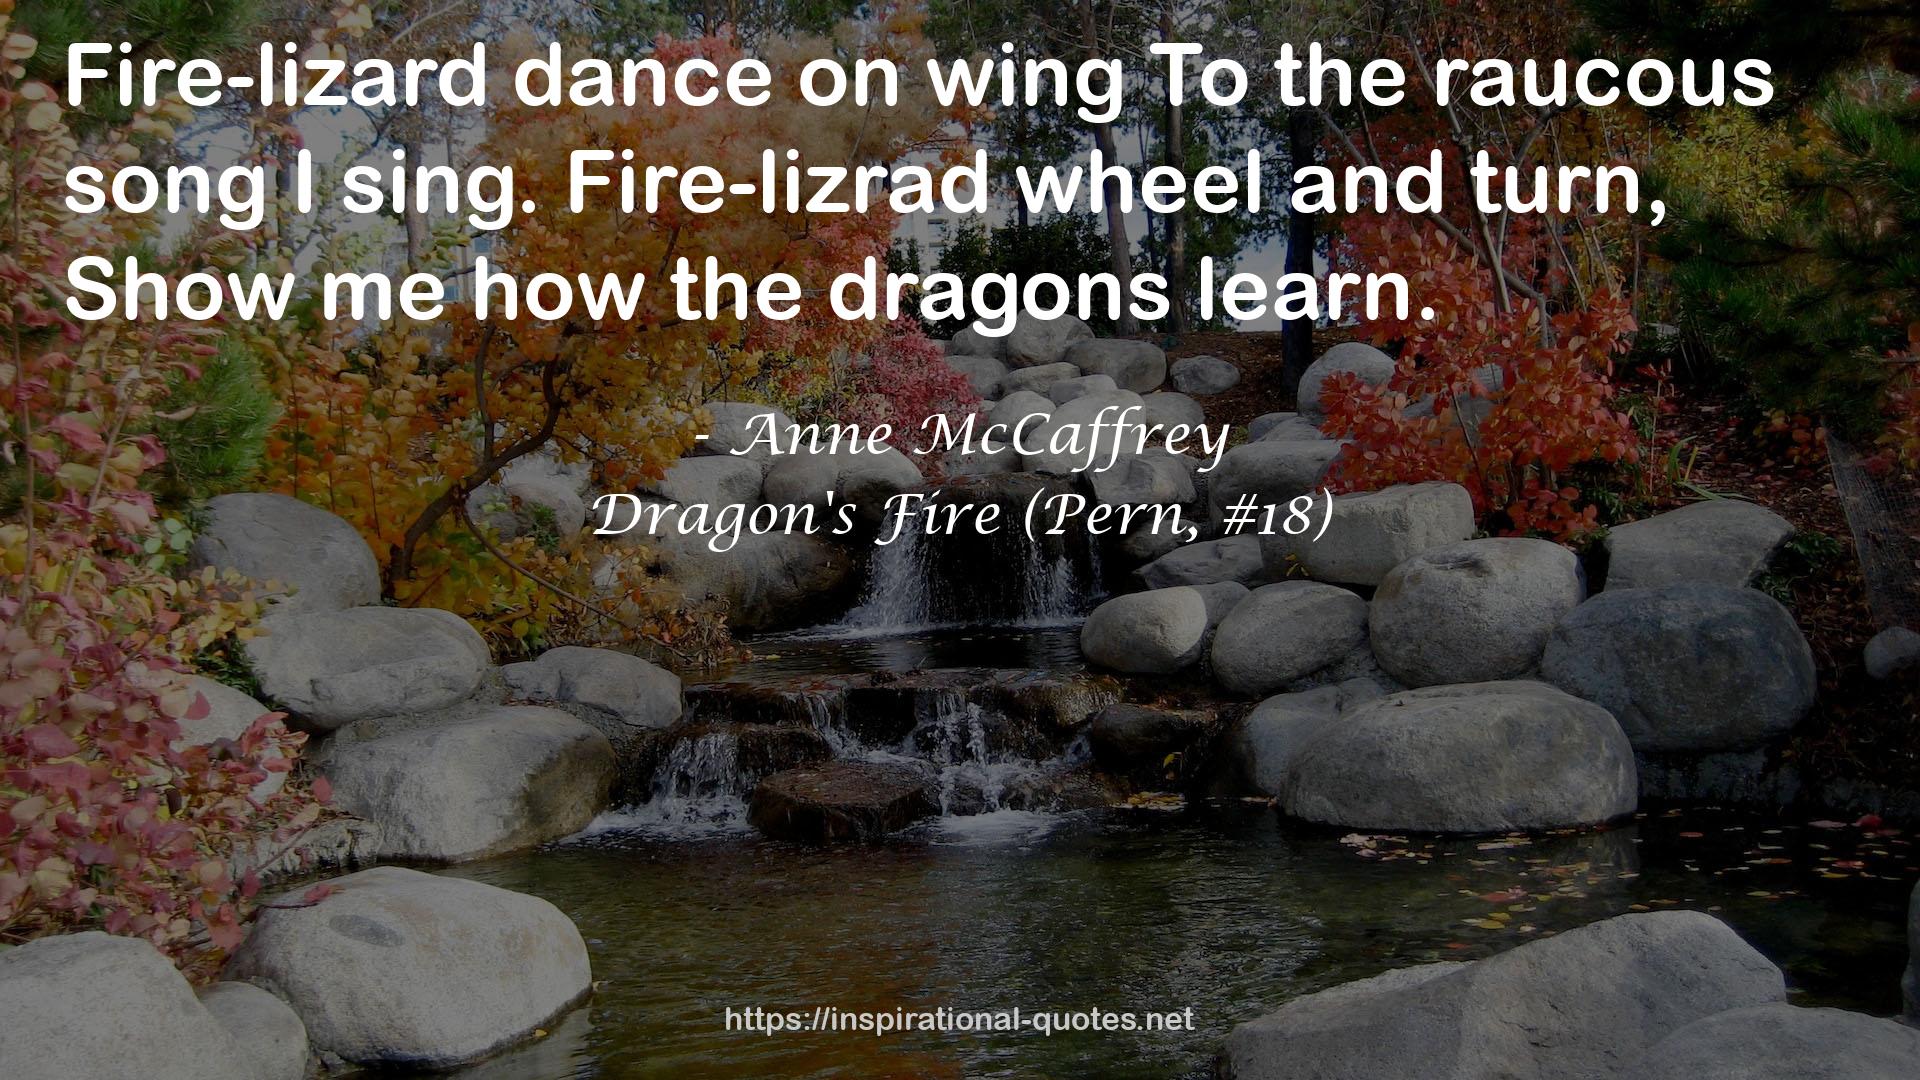 Dragon's Fire (Pern, #18) QUOTES